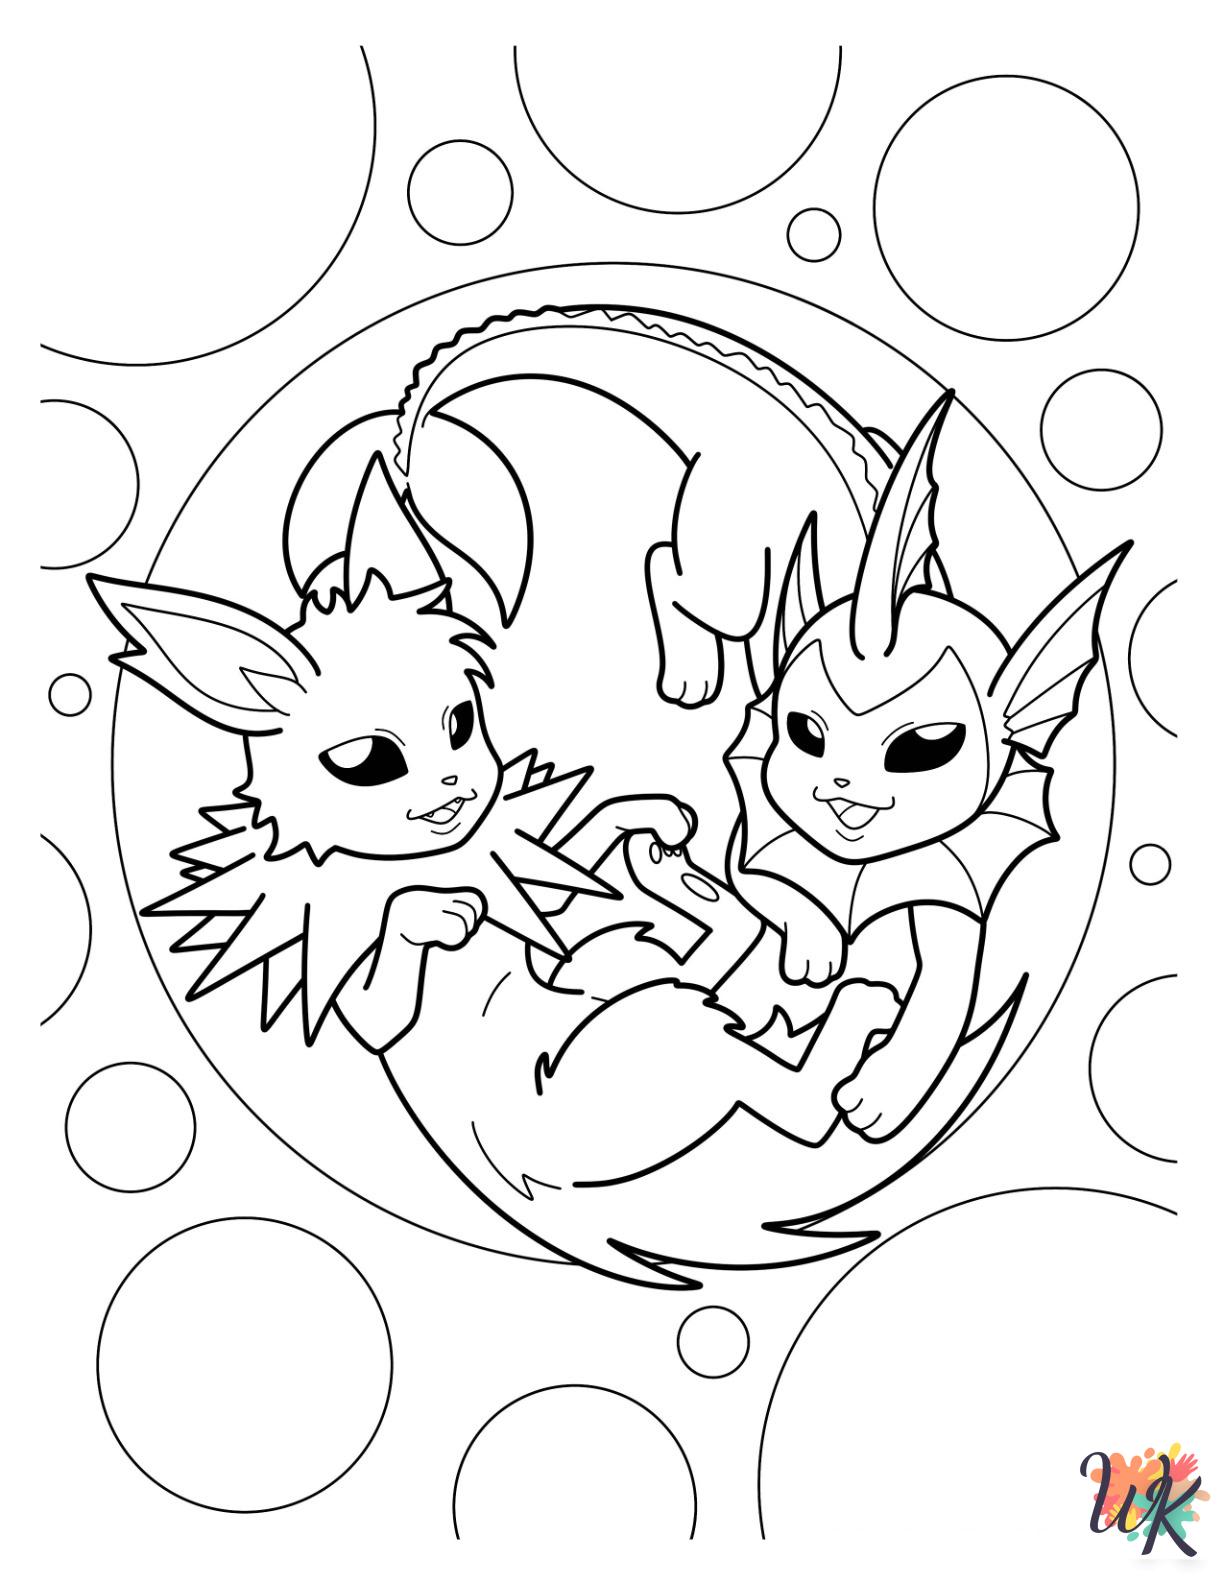 Jolteon coloring pages to print